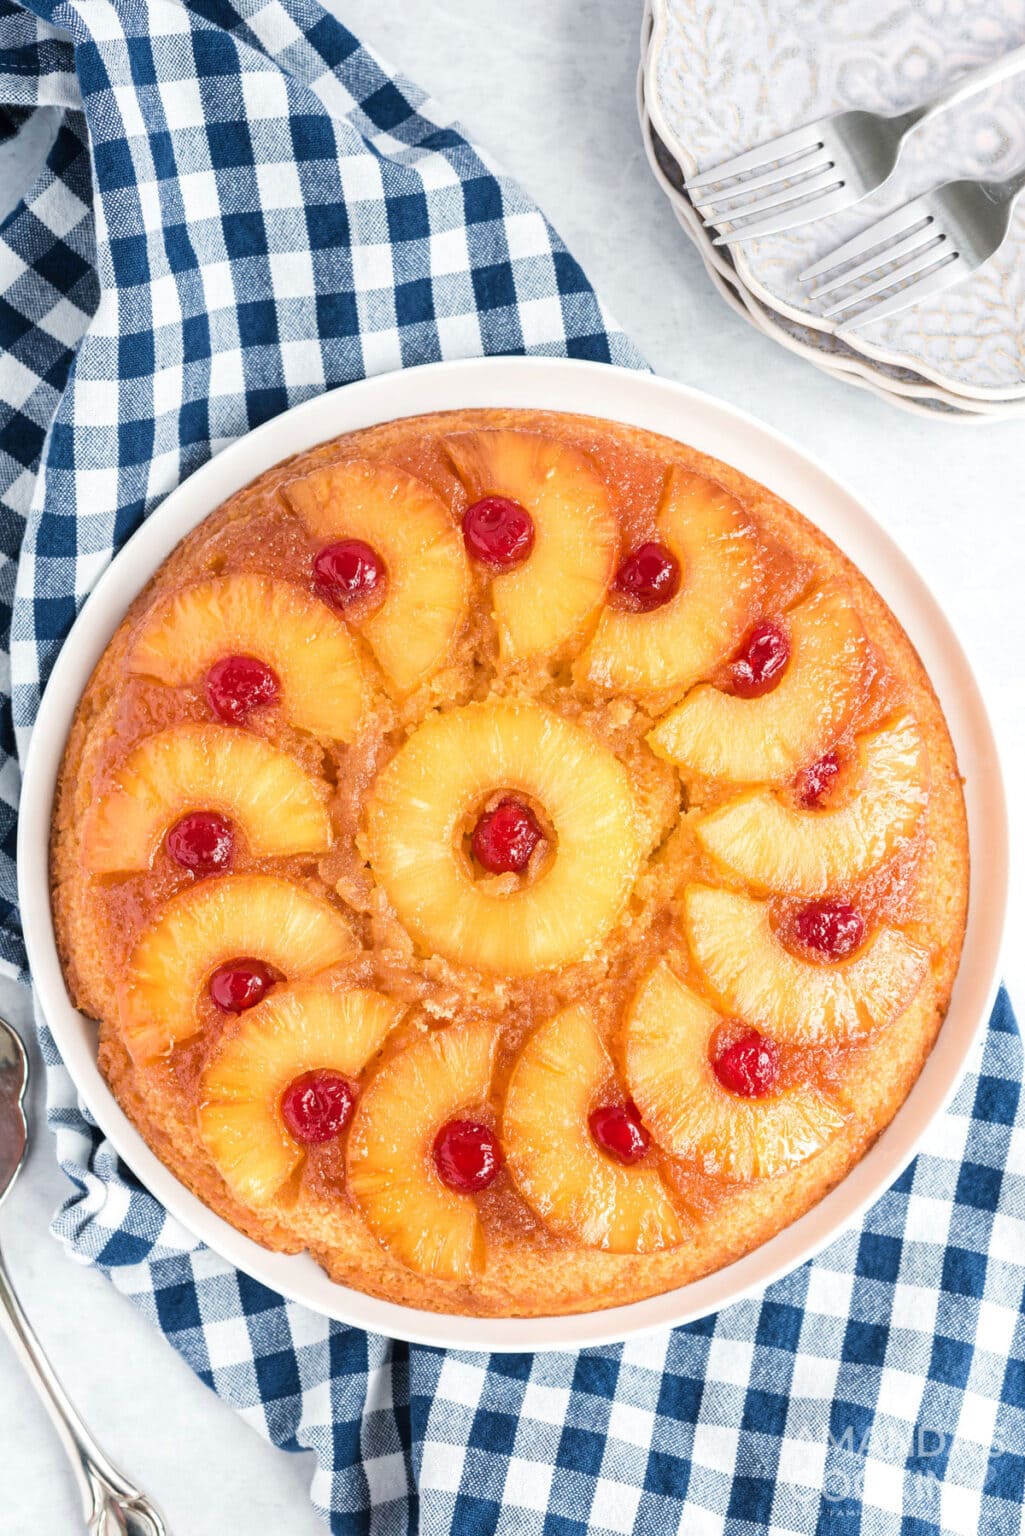 Pineapple Upside Down Cake in a Cast Iron Skillet Amanda